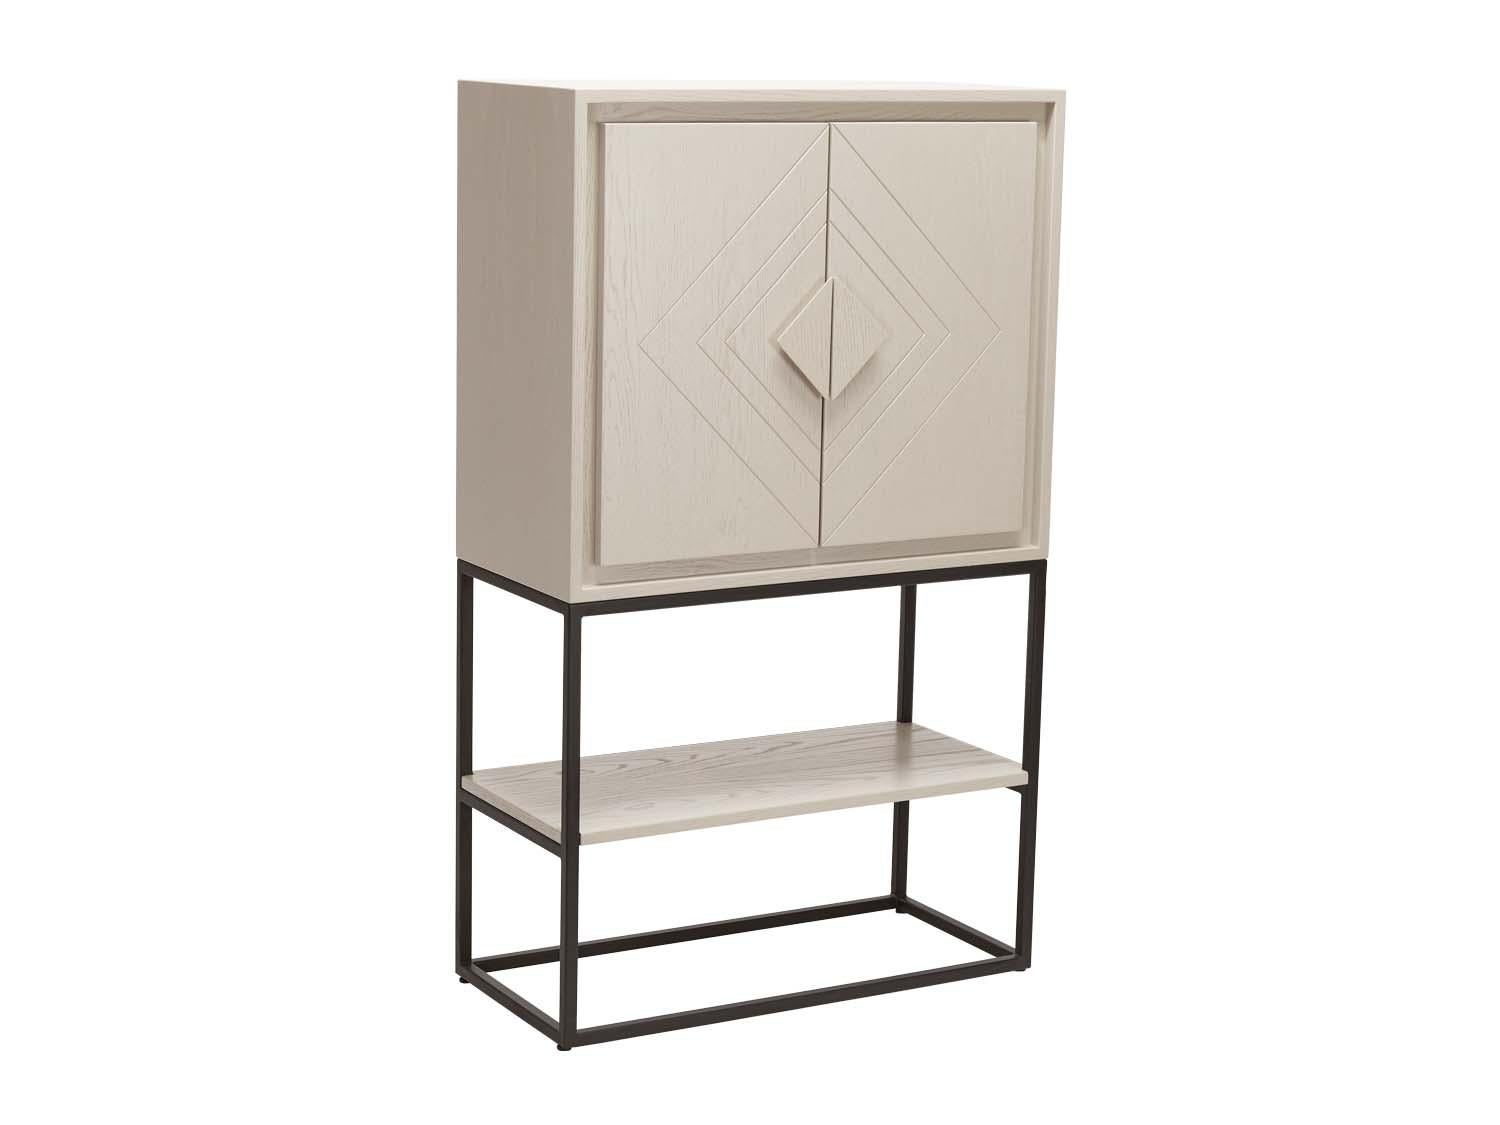 The diamond bar rests upon an open metal base with one shelf below and features a scribed geometric pattern on its doors. The interior has a bronze mirror back, glassware shelf with a small drawer, and a removable bronzed mirrored tray.

The